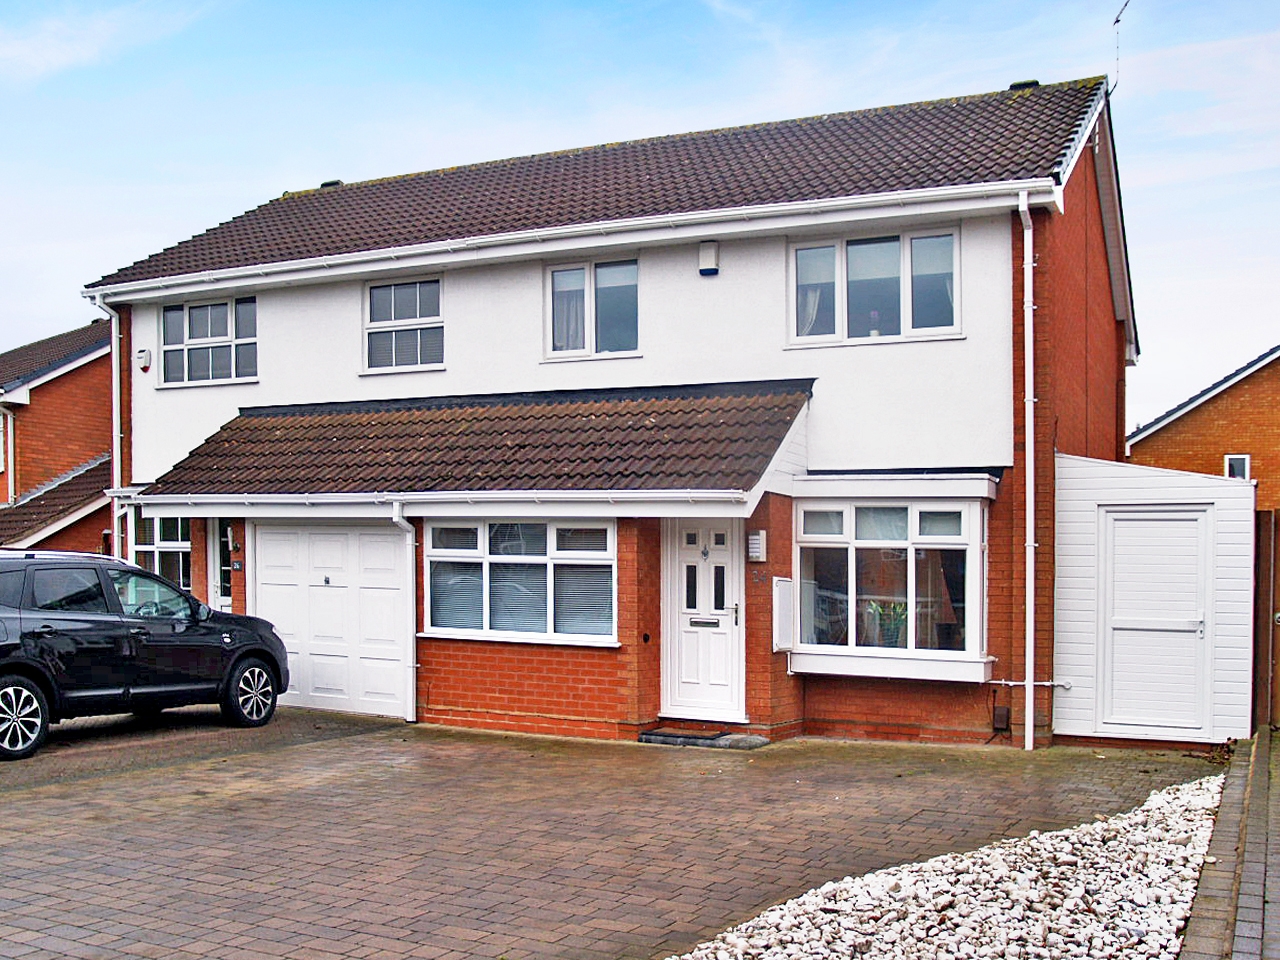 3 bedroom semi detached house Application Made in Solihull - photograph 1.